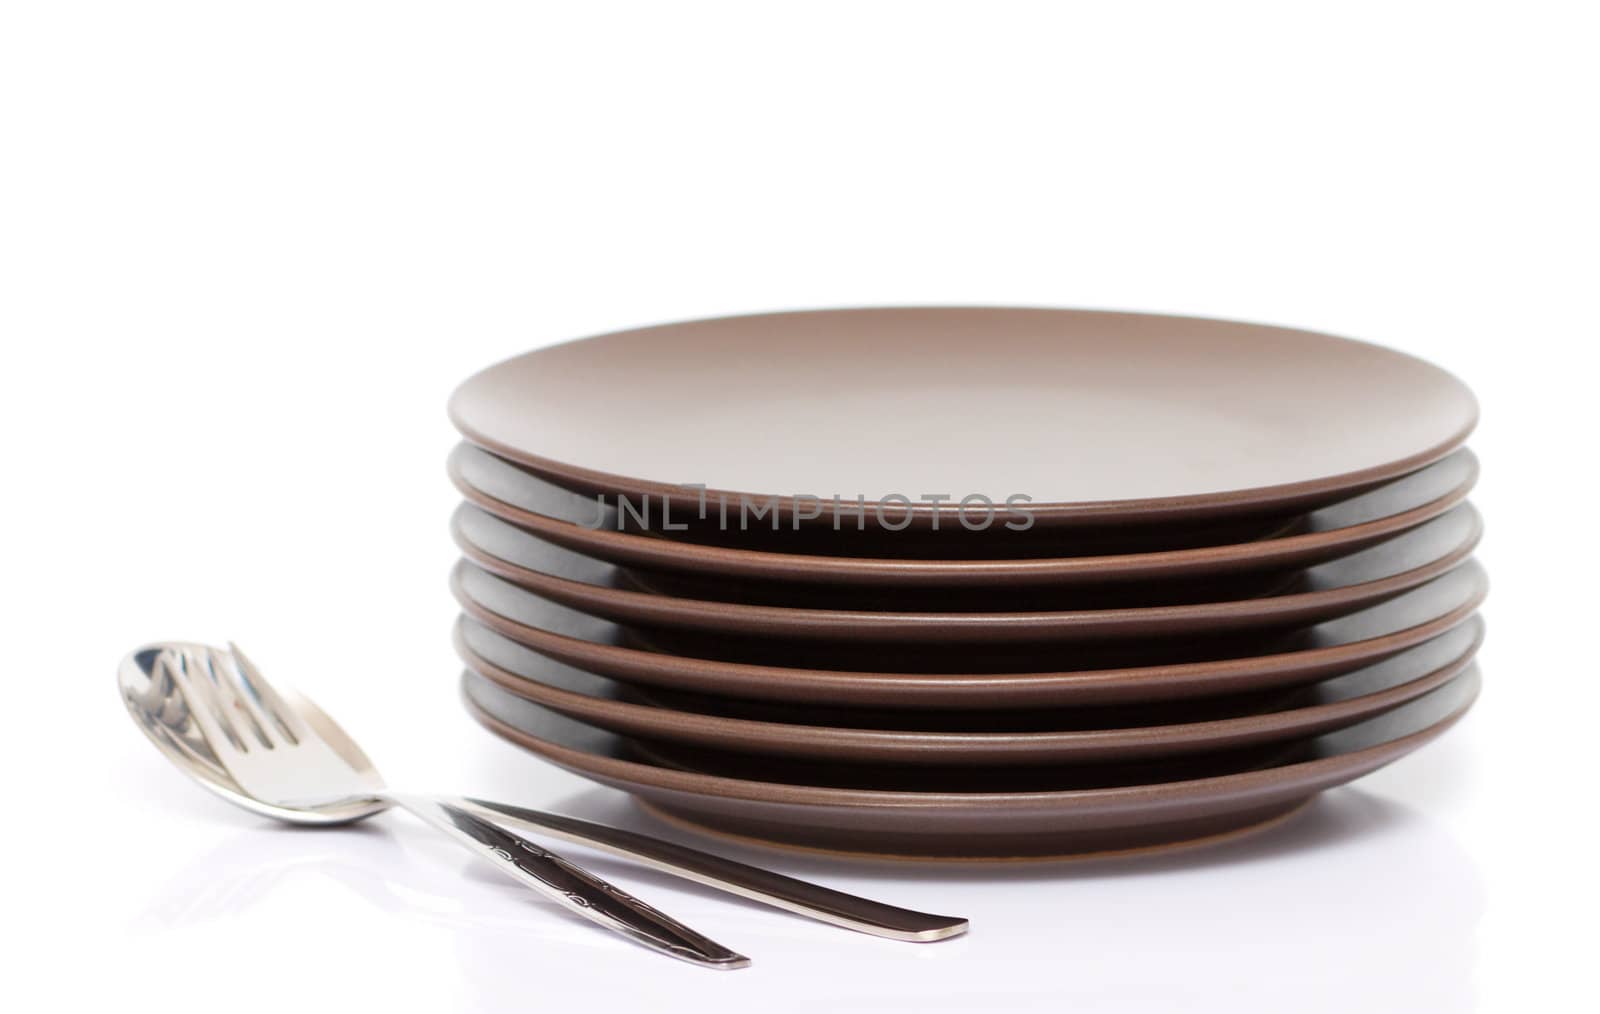 A stack of plates with fork and spoon